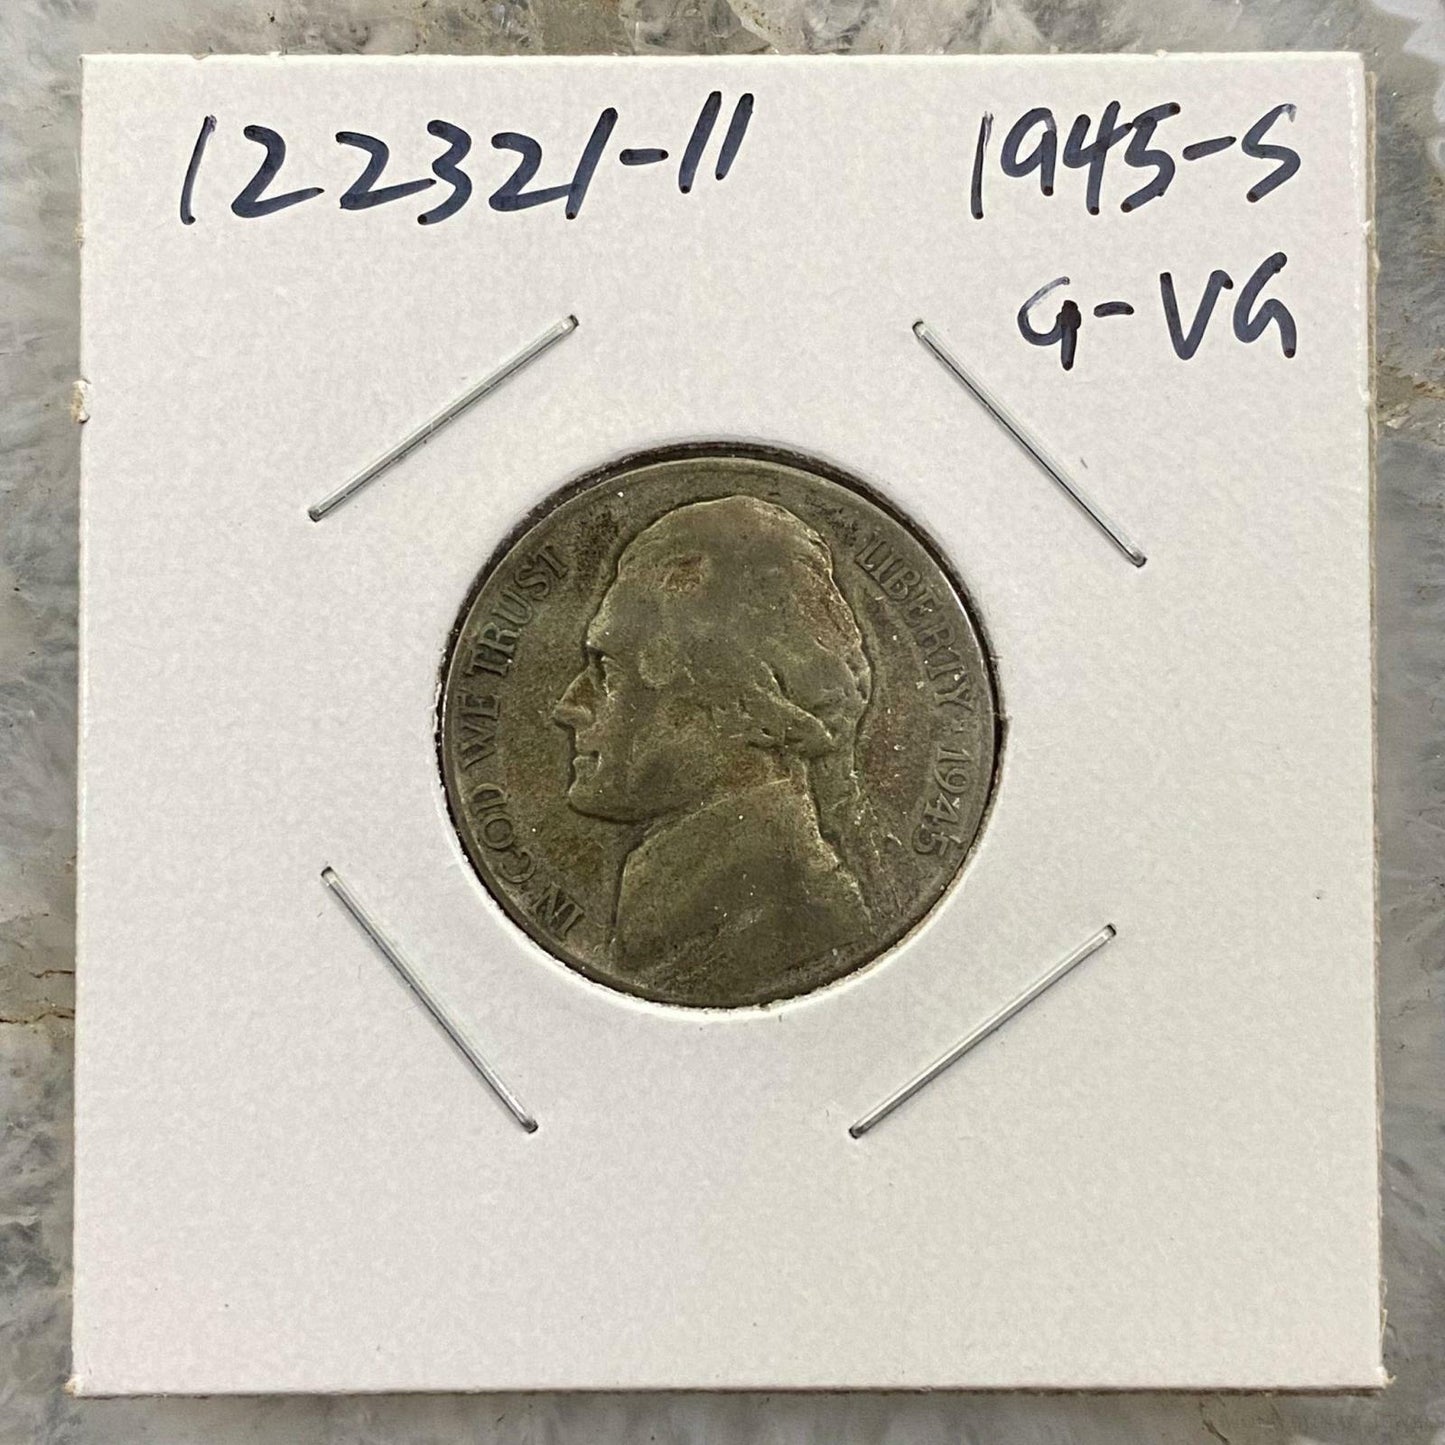 1945-S US Wartime Jefferson (1942-1945) 5 Cent 35% Silver G-VG #122321-11